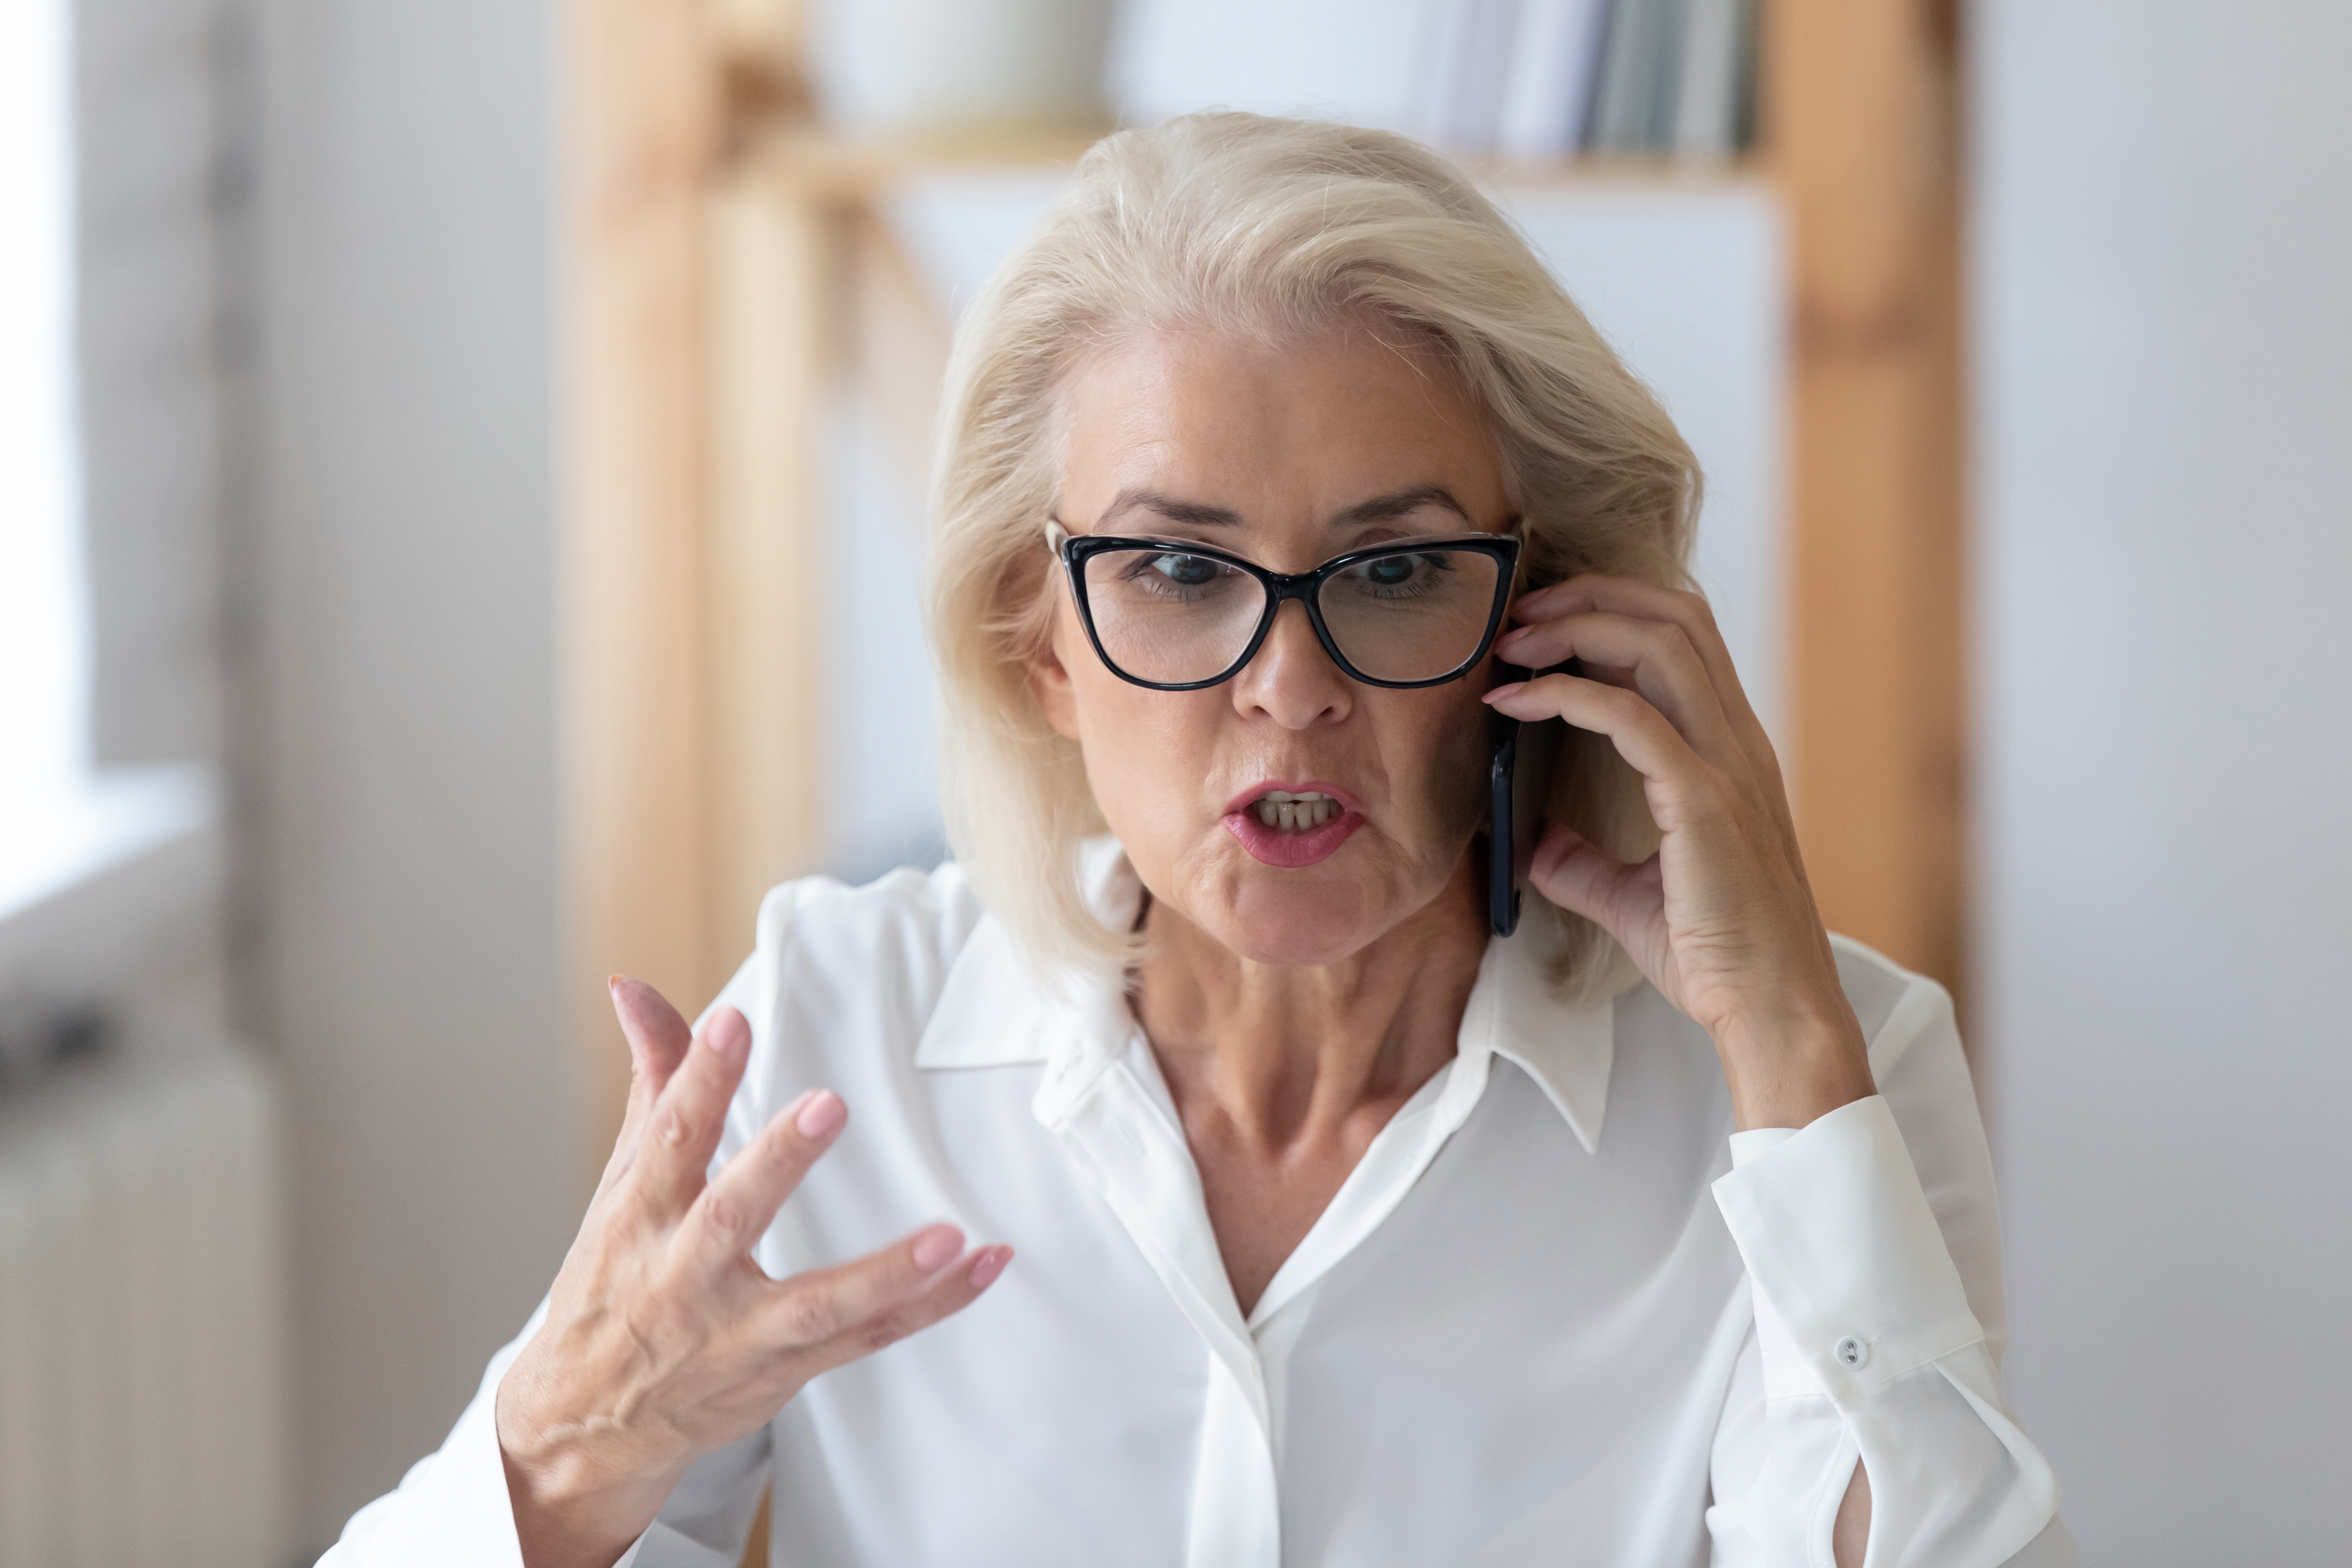 A senior woman on the phone | Source: Shutterstock